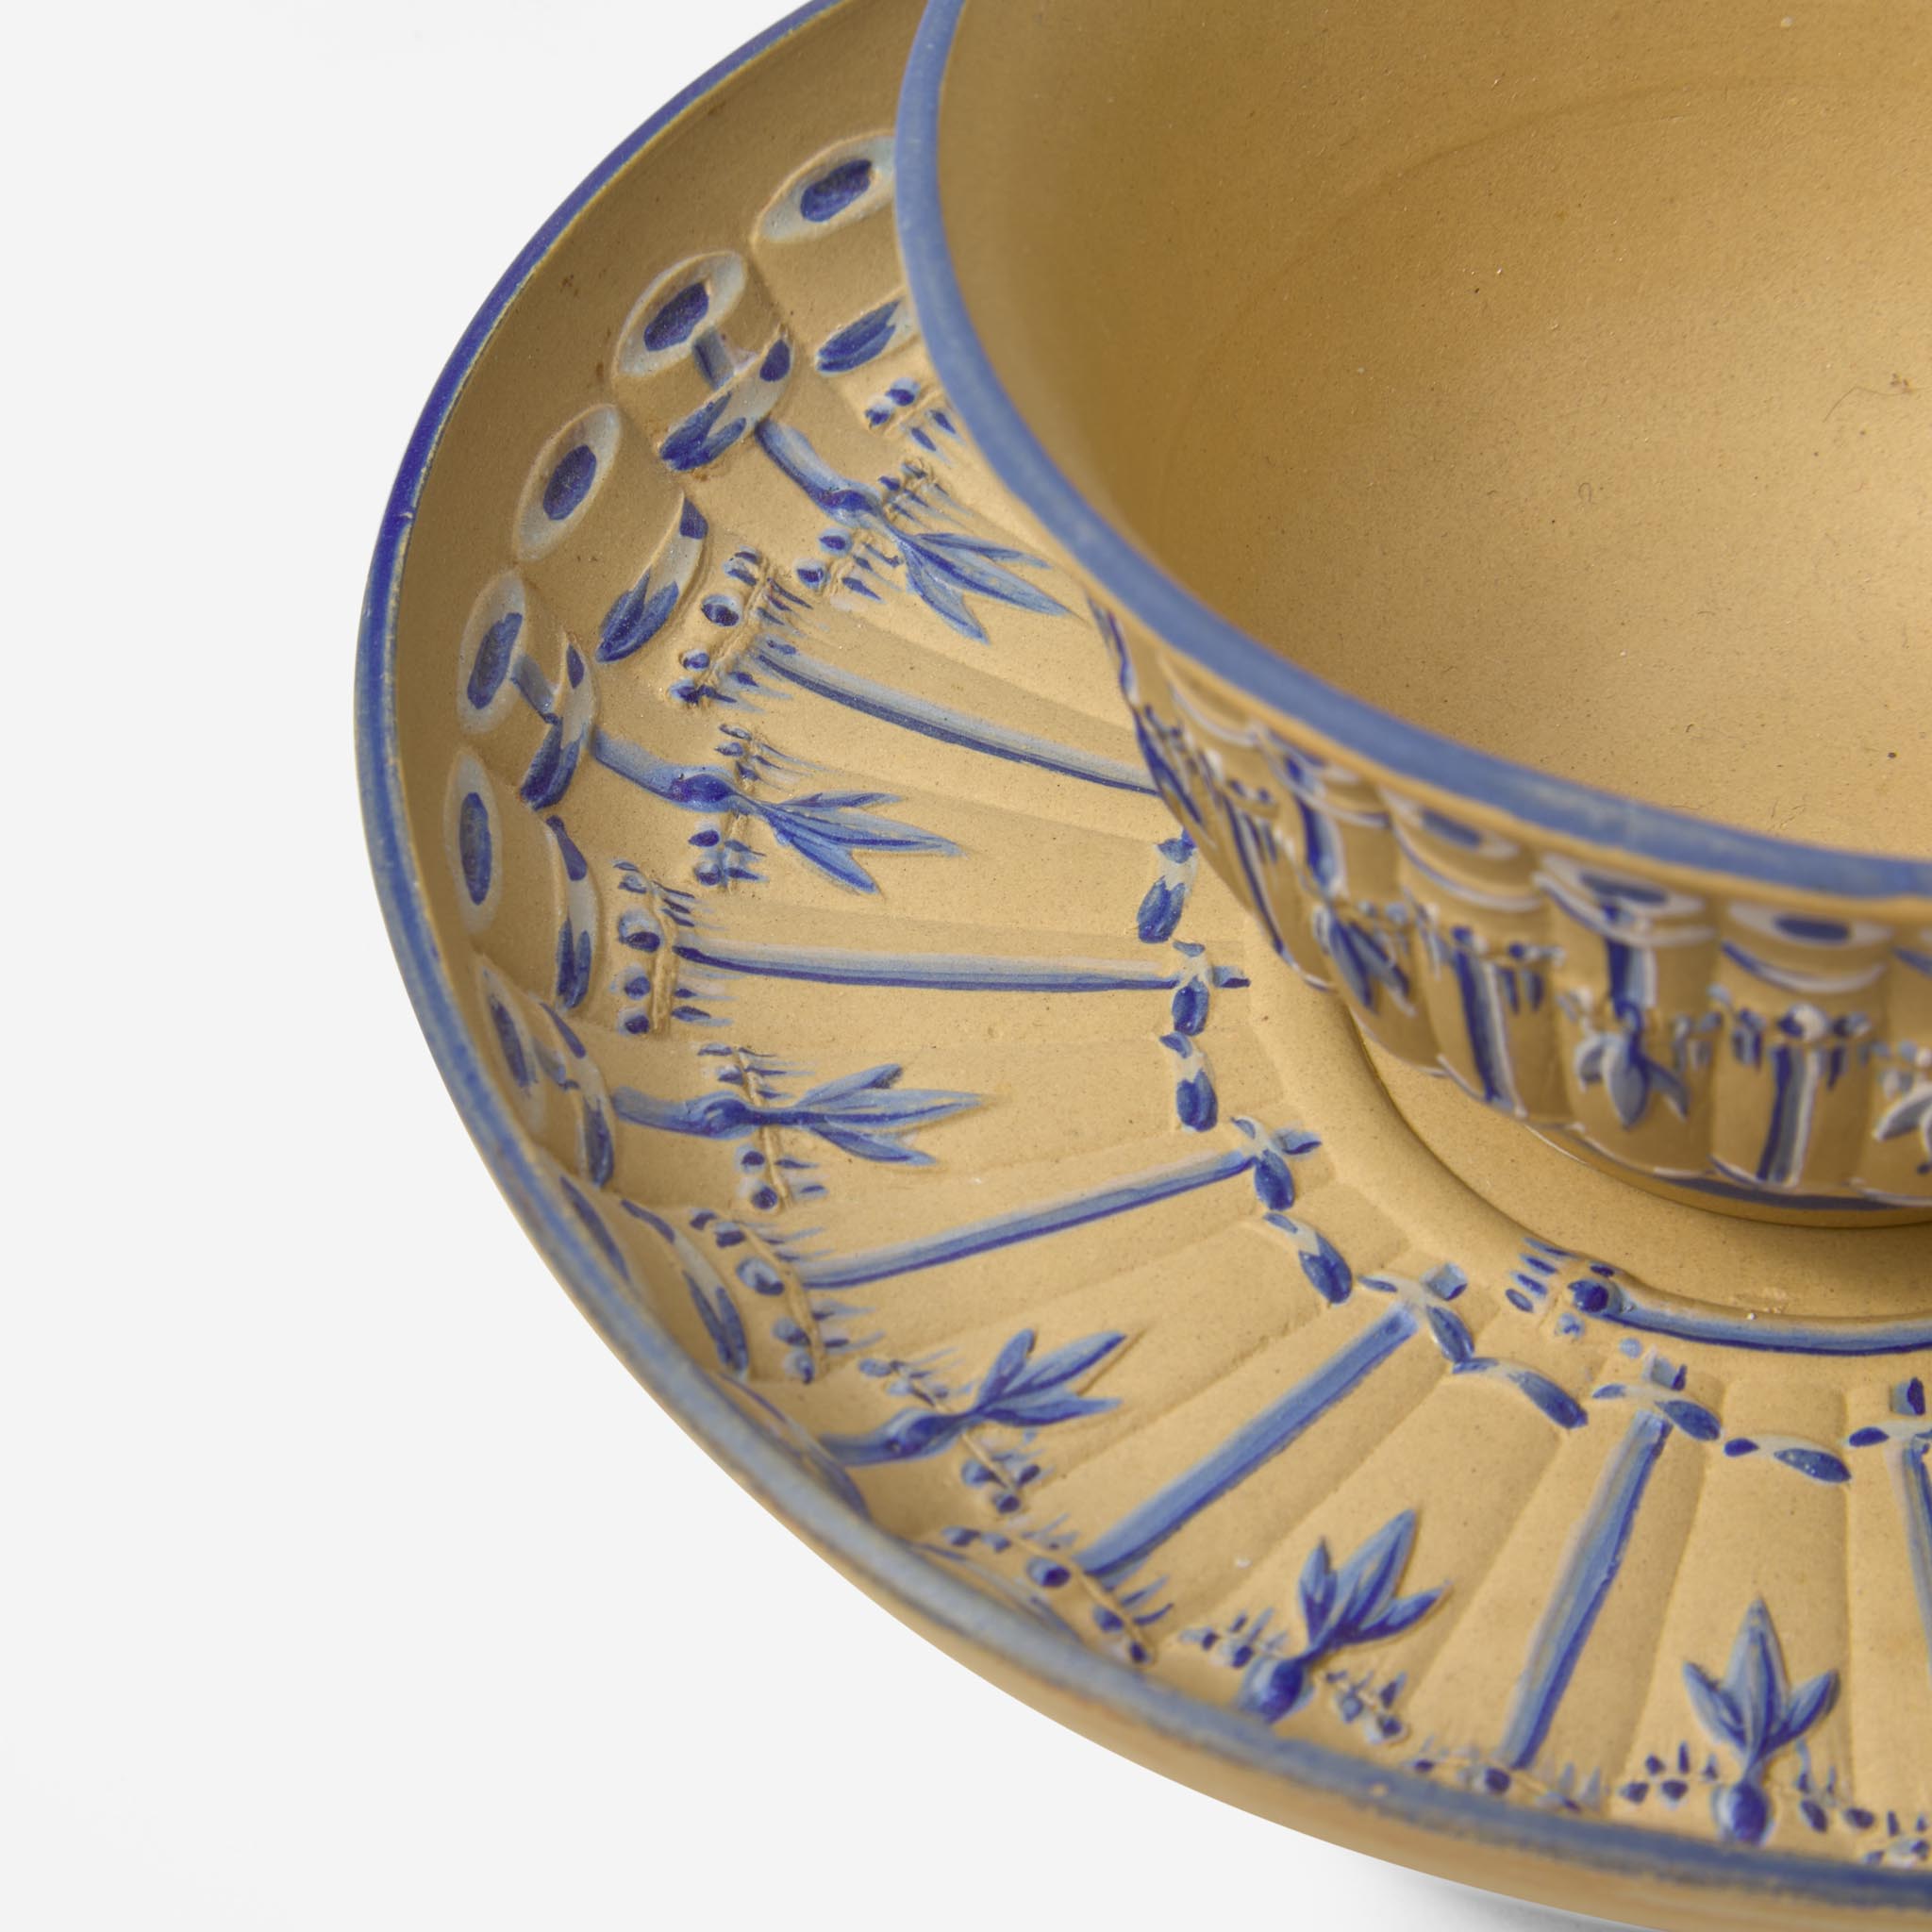 A Wedgwood Encaustic-Decorated Caneware Cup and Saucer UK, circa 1787 - Image 2 of 4